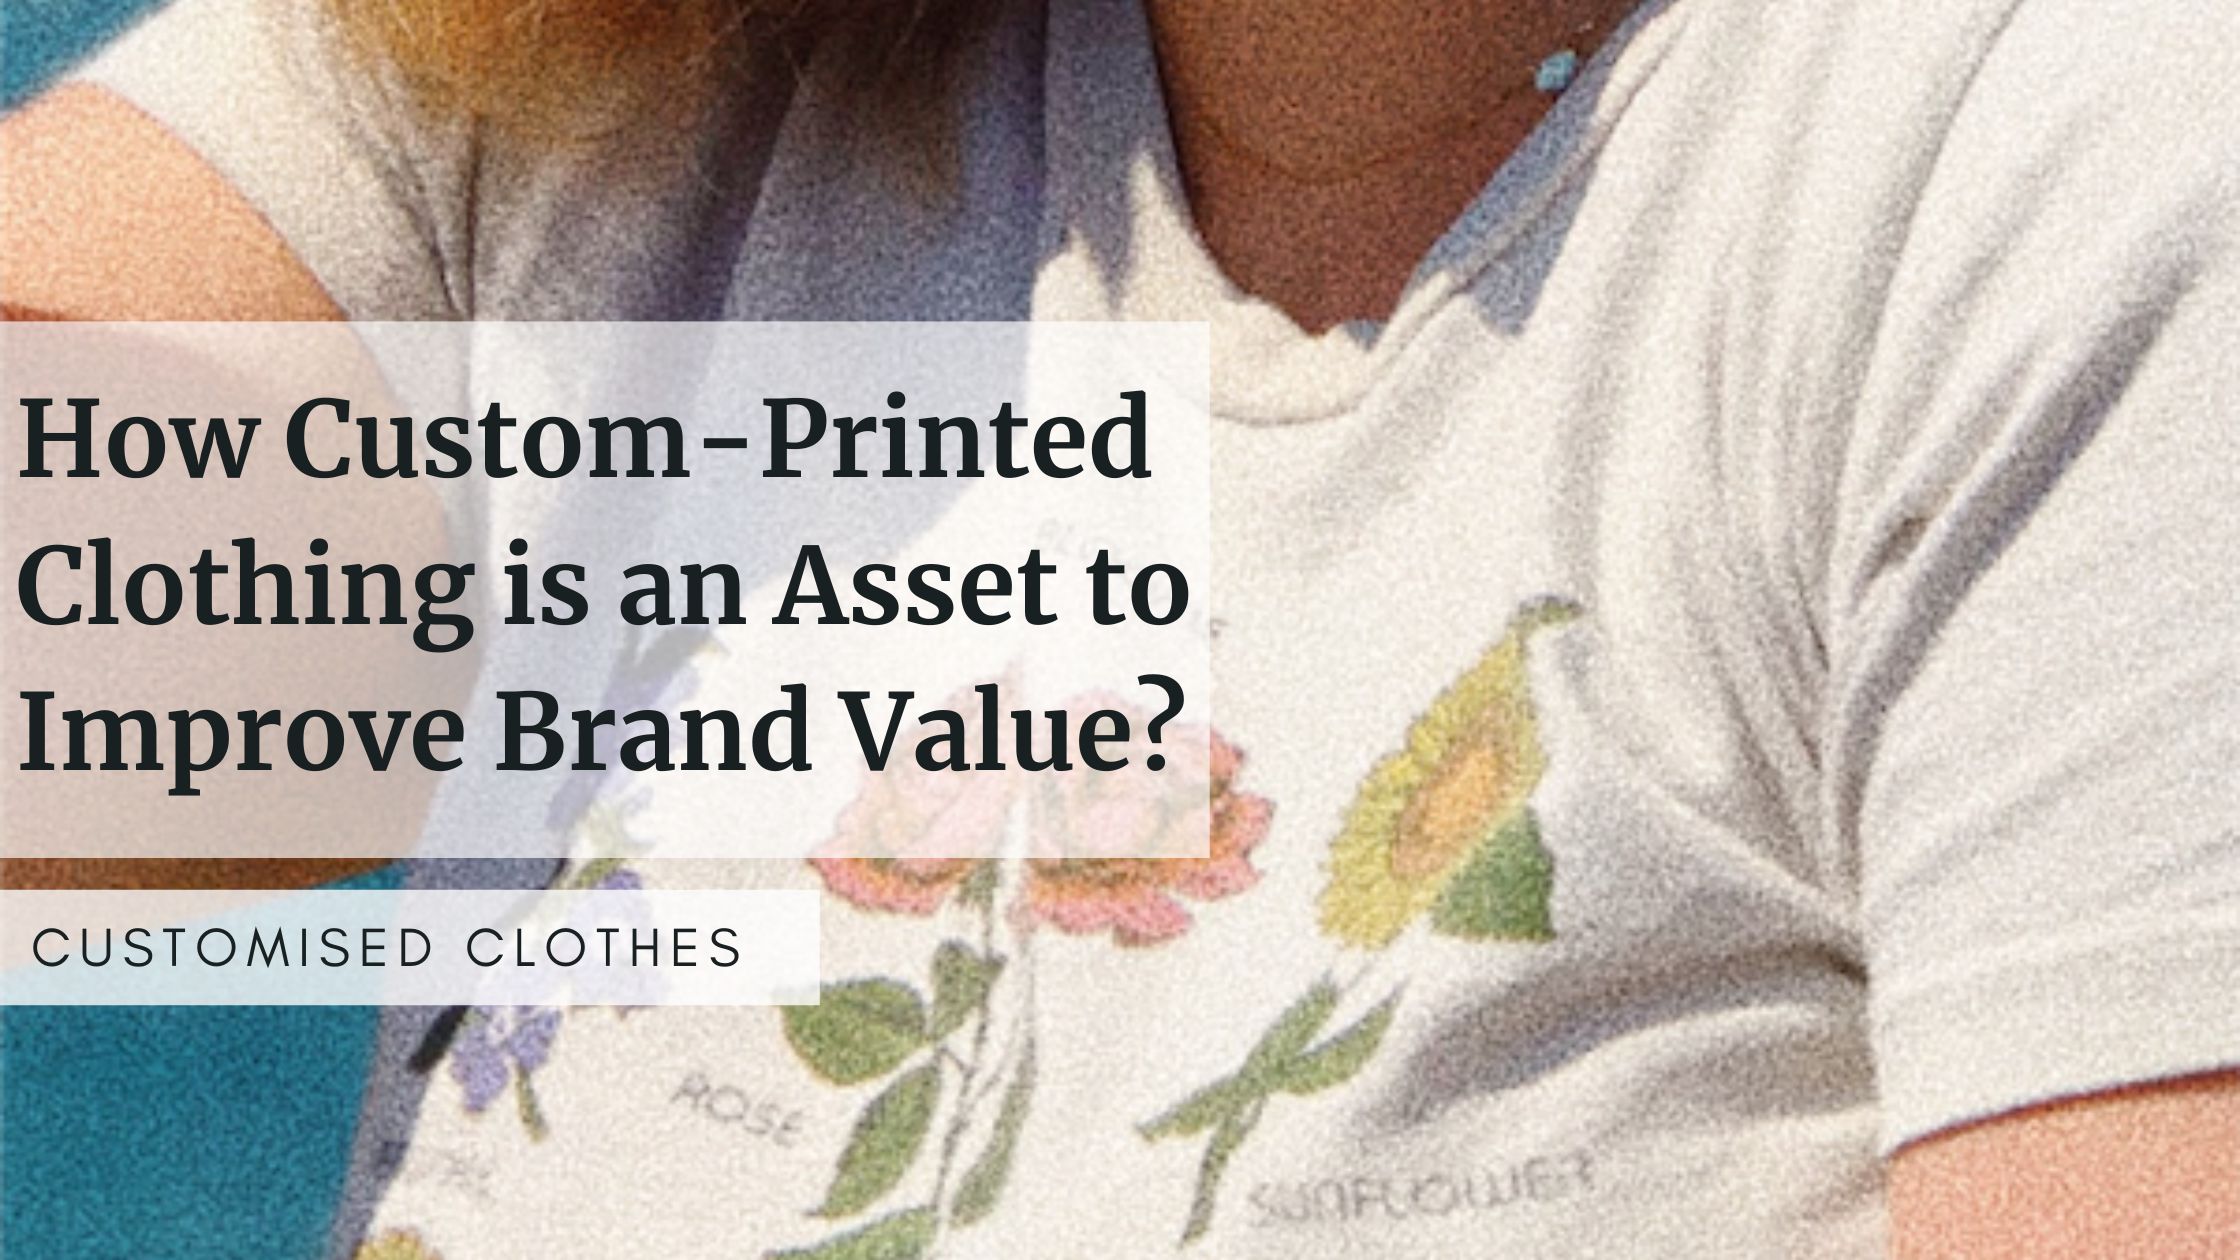 How Custom Printed Clothing is an asset to improve Brand Value